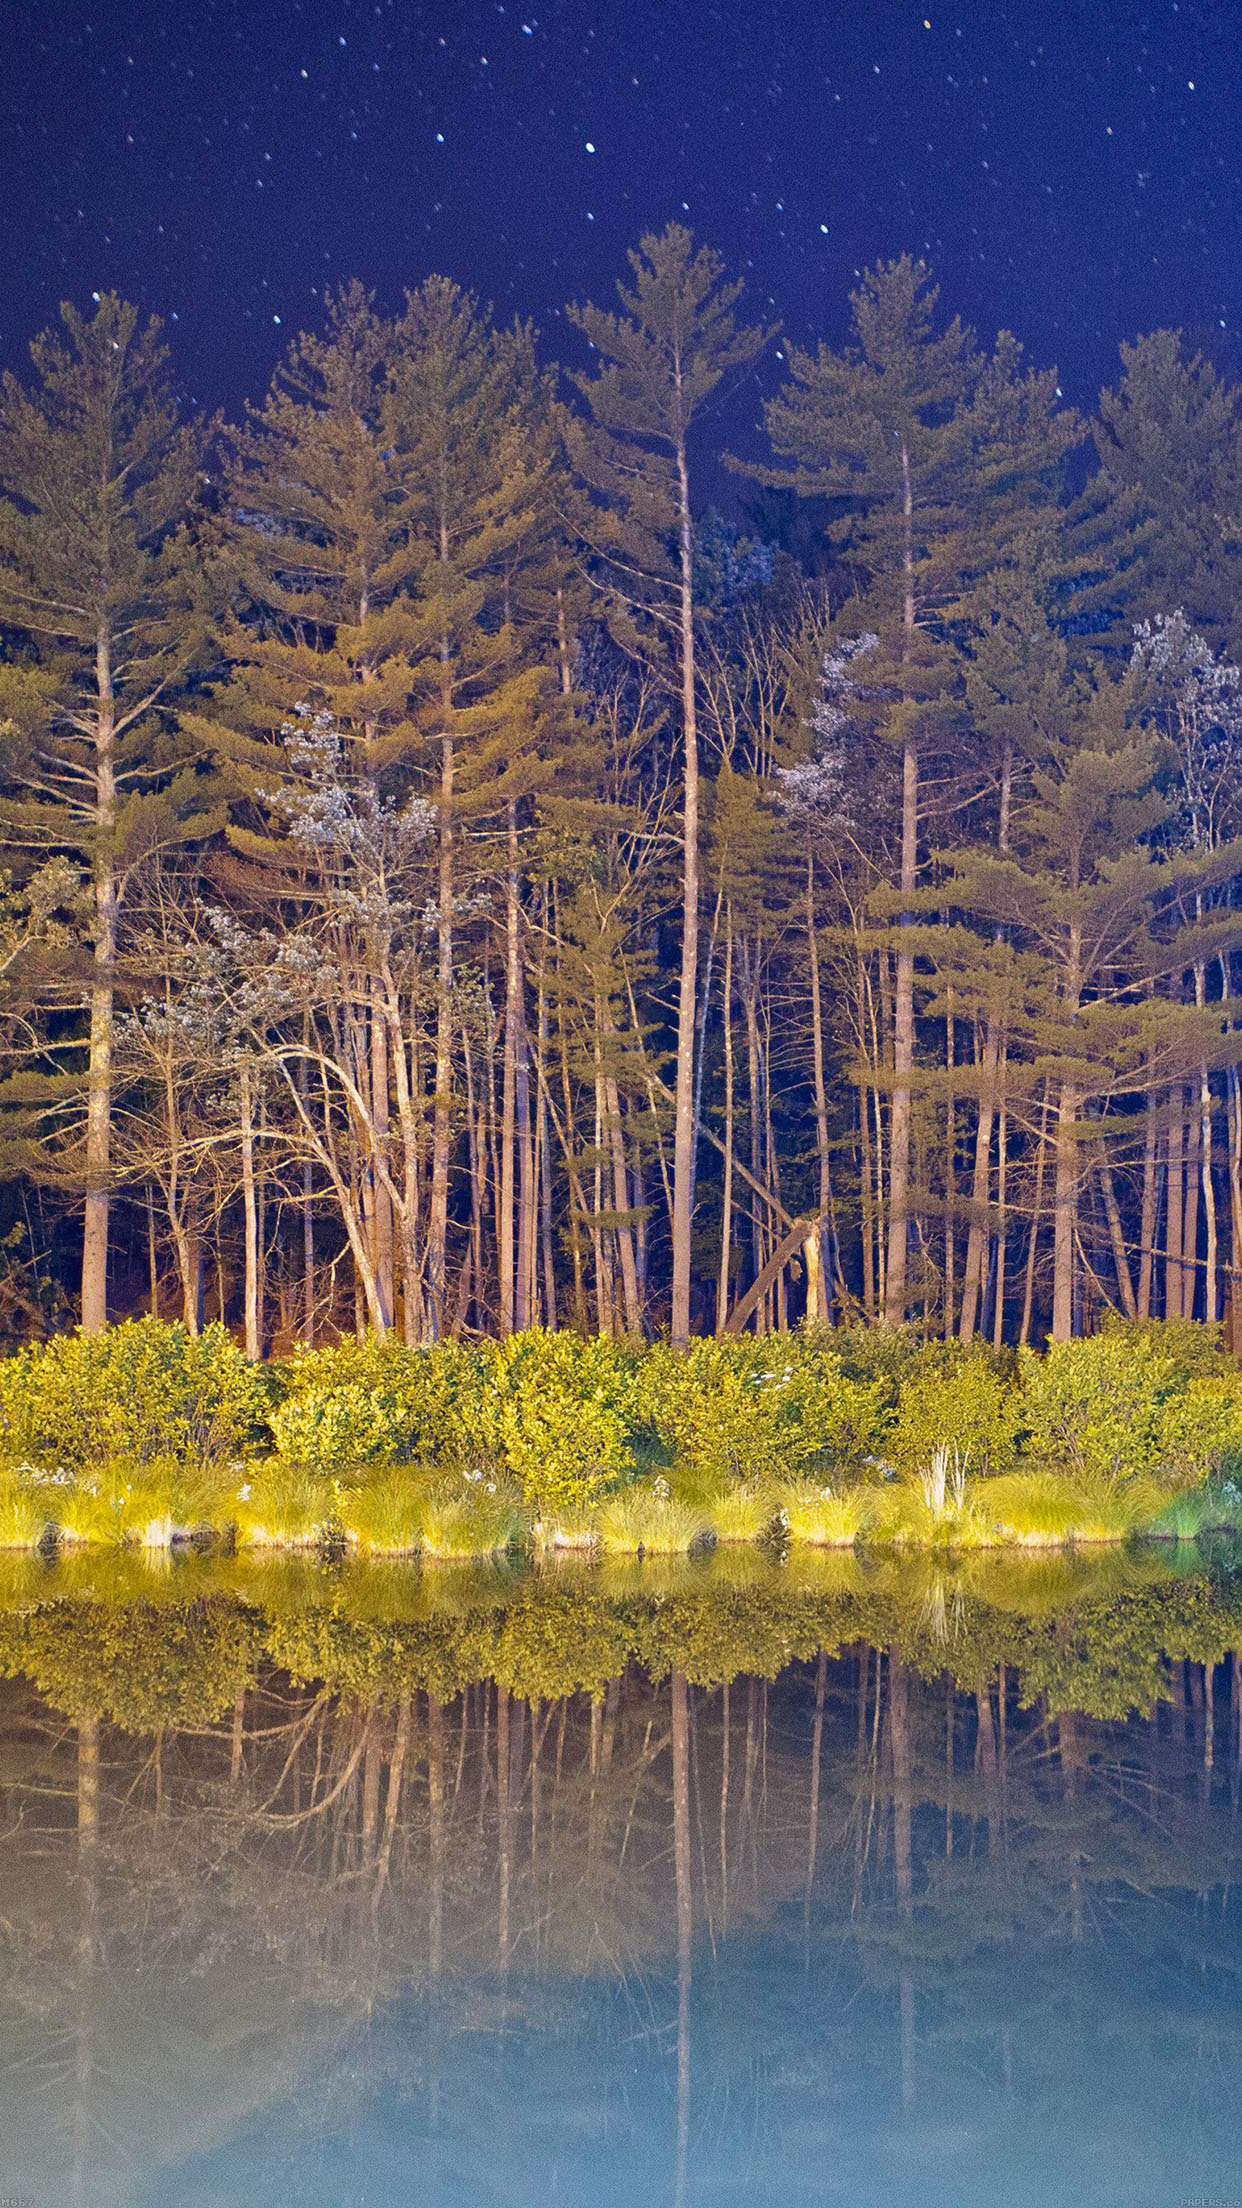 Night Wood With Lake Nature Android wallpaper